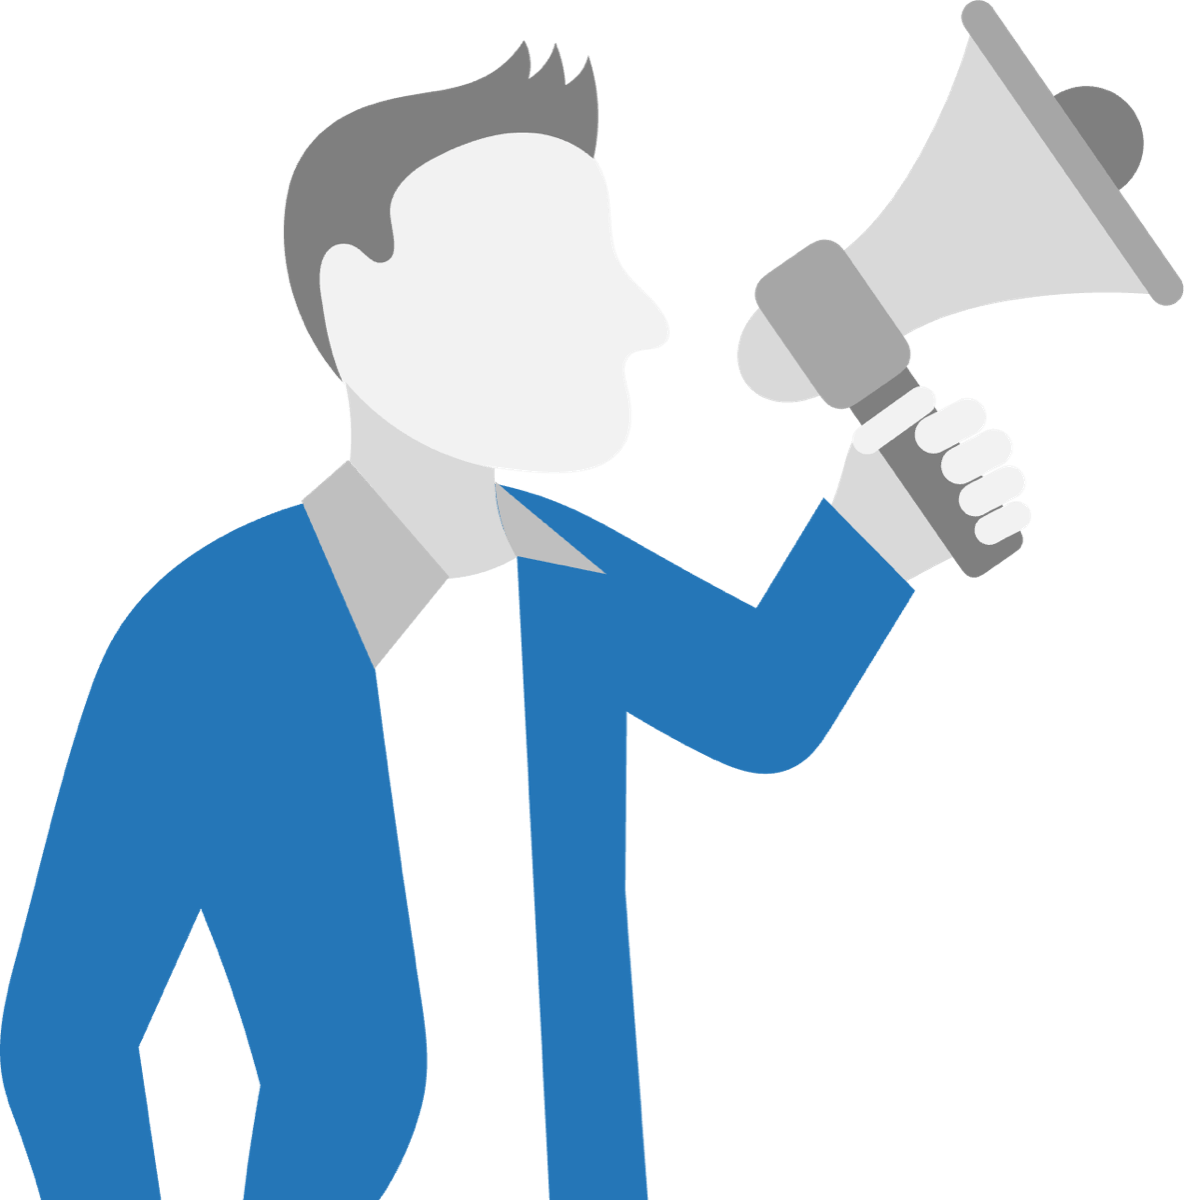 Stock image of a person with a megaphone.